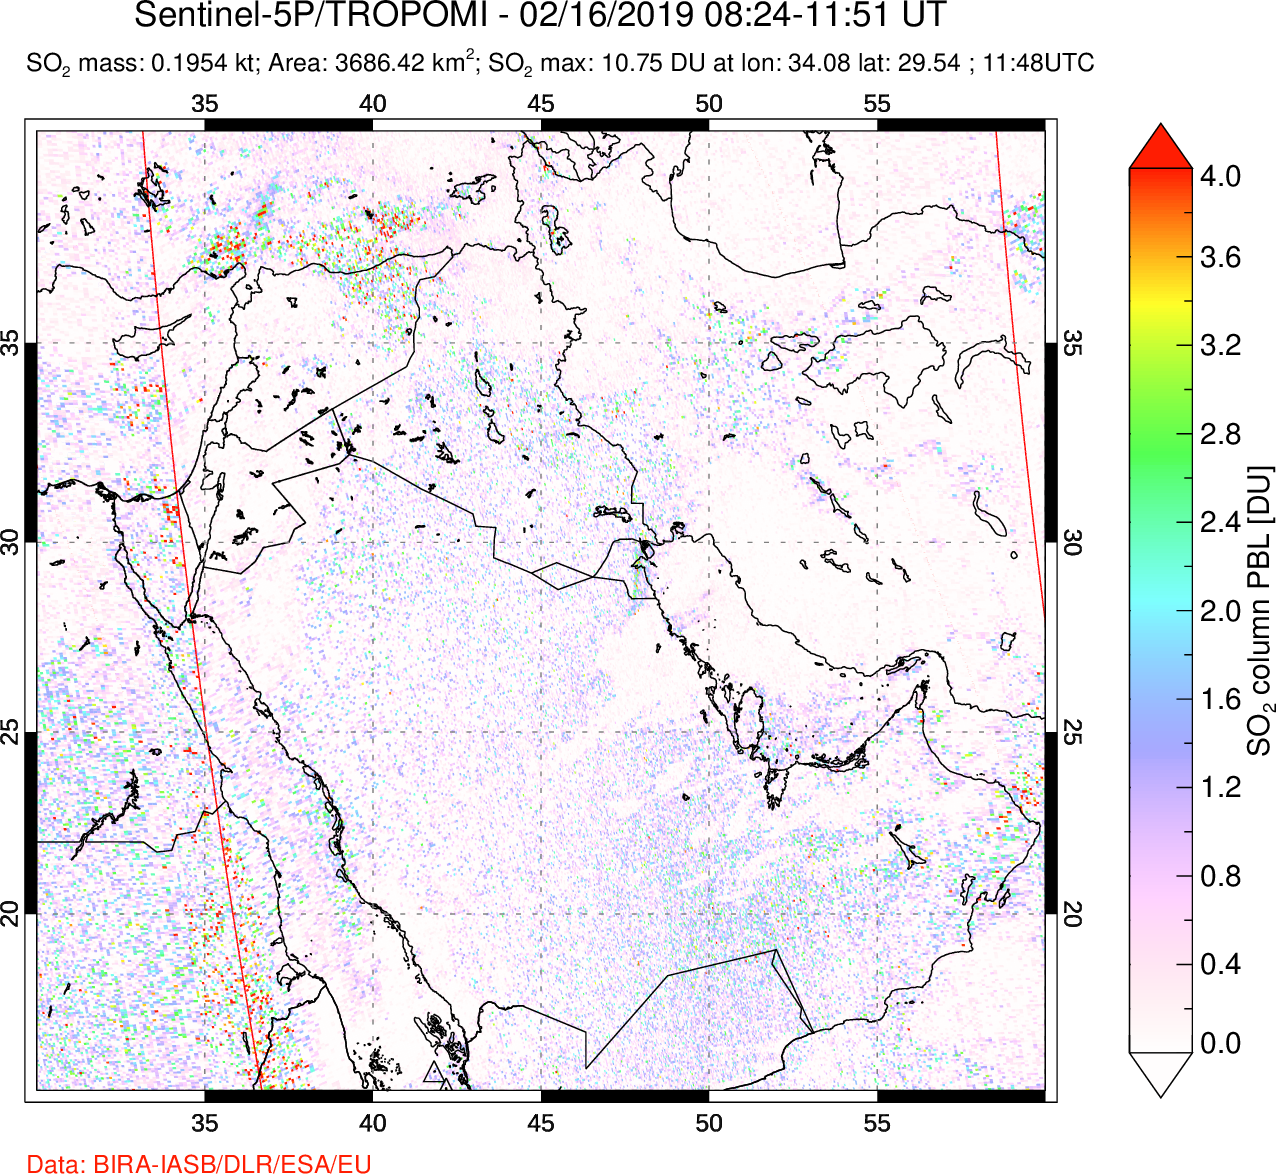 A sulfur dioxide image over Middle East on Feb 16, 2019.